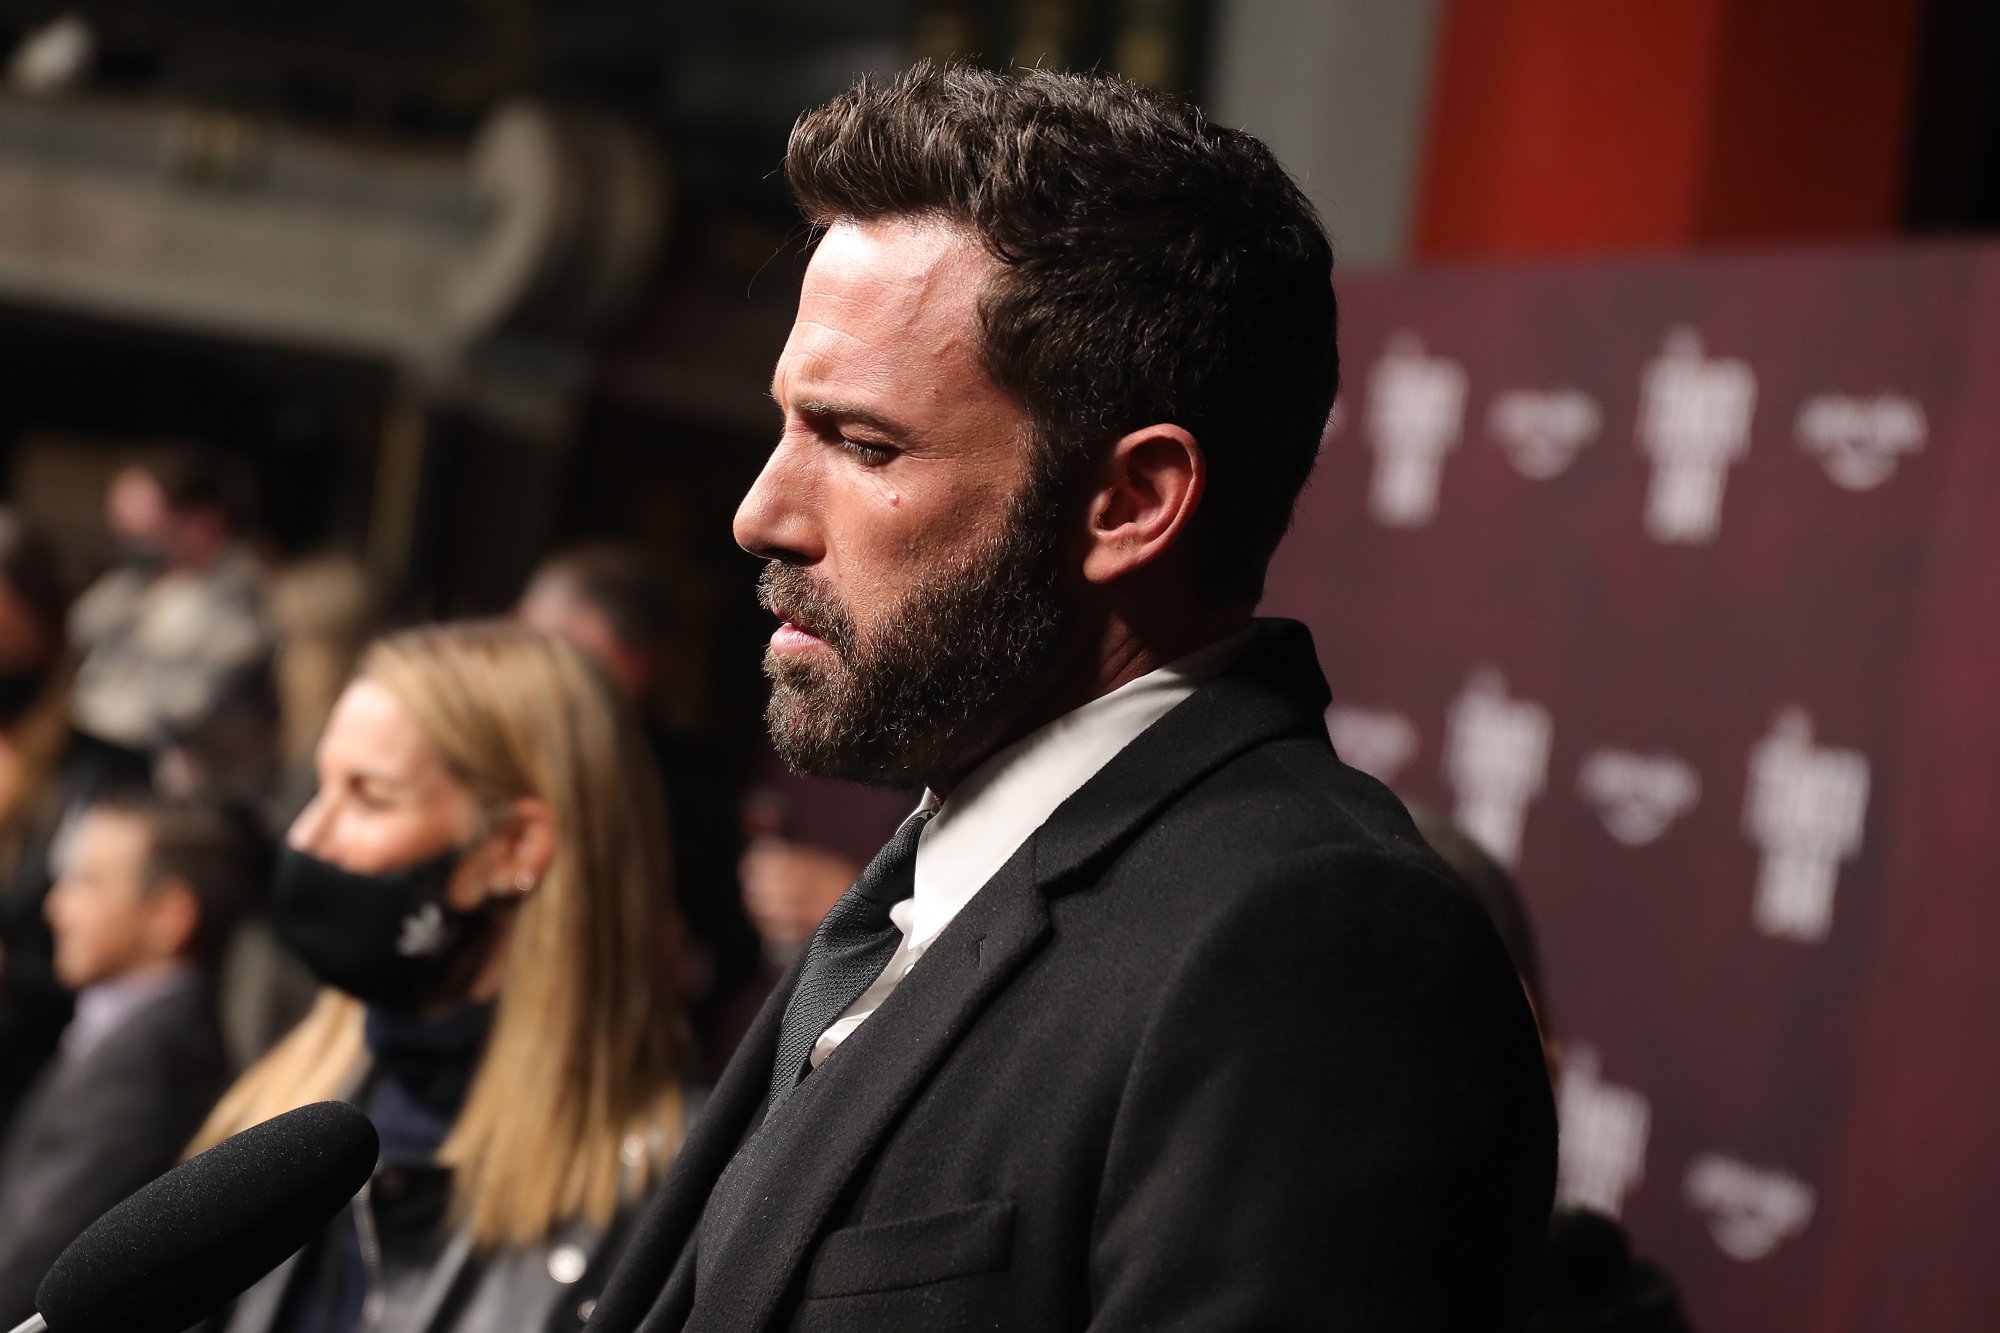 'The Last Duel' actor Ben Affleck talking with a microphone in front of him on the red carpet